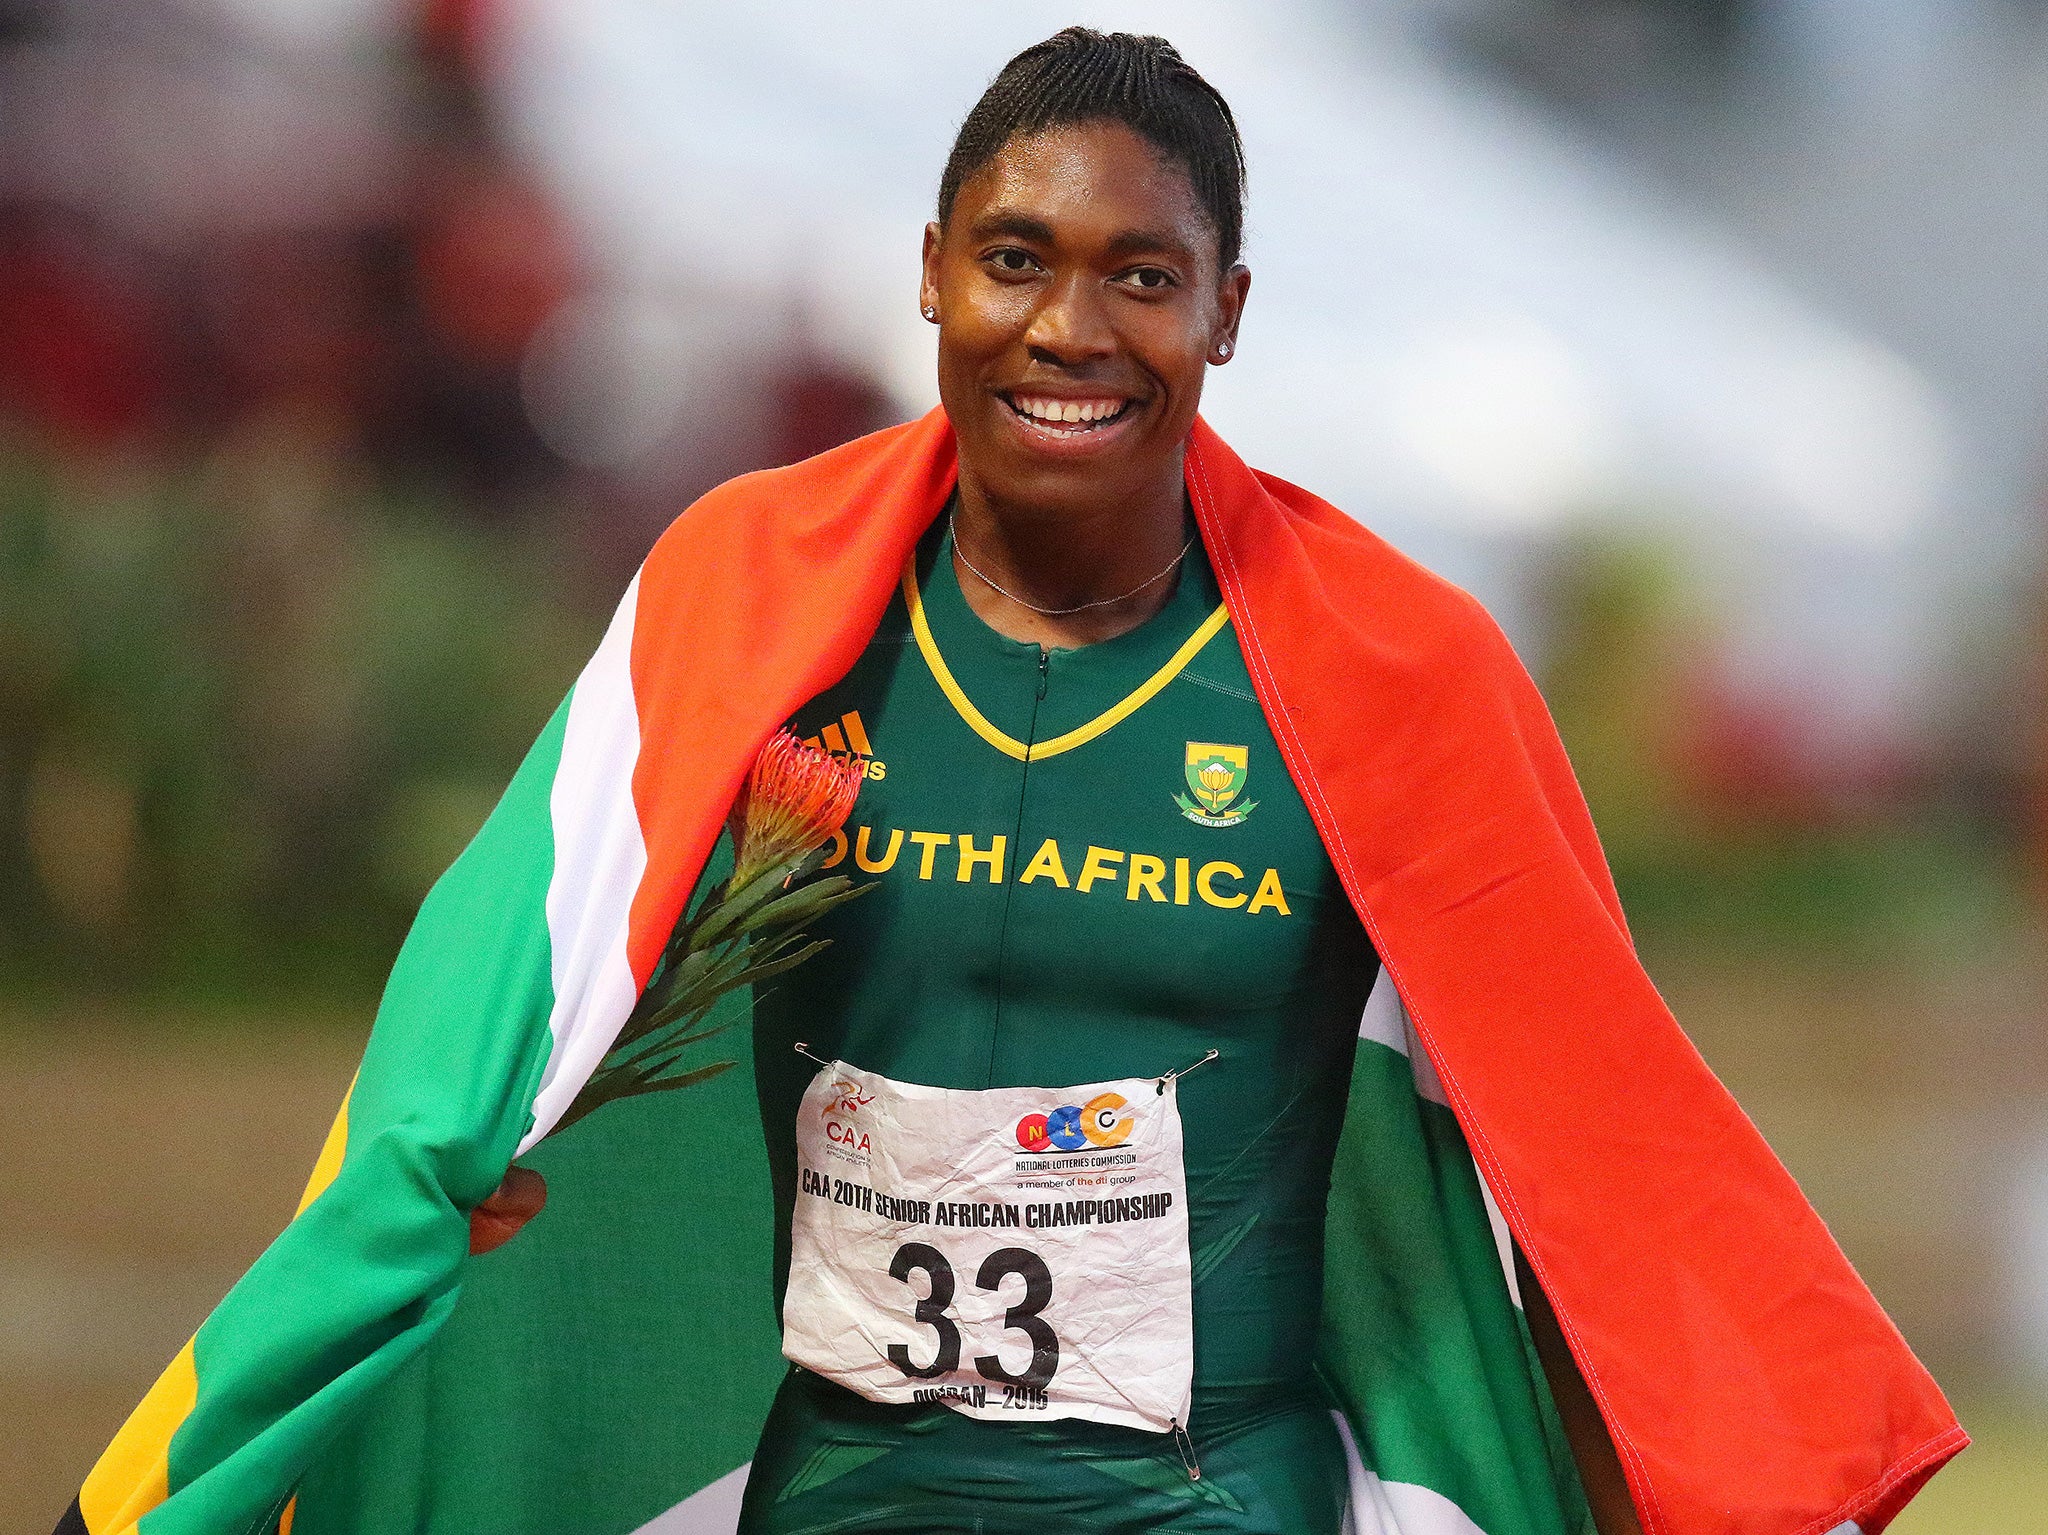 Caster Semenya is due to run in the 800m final in the Rio Olympics